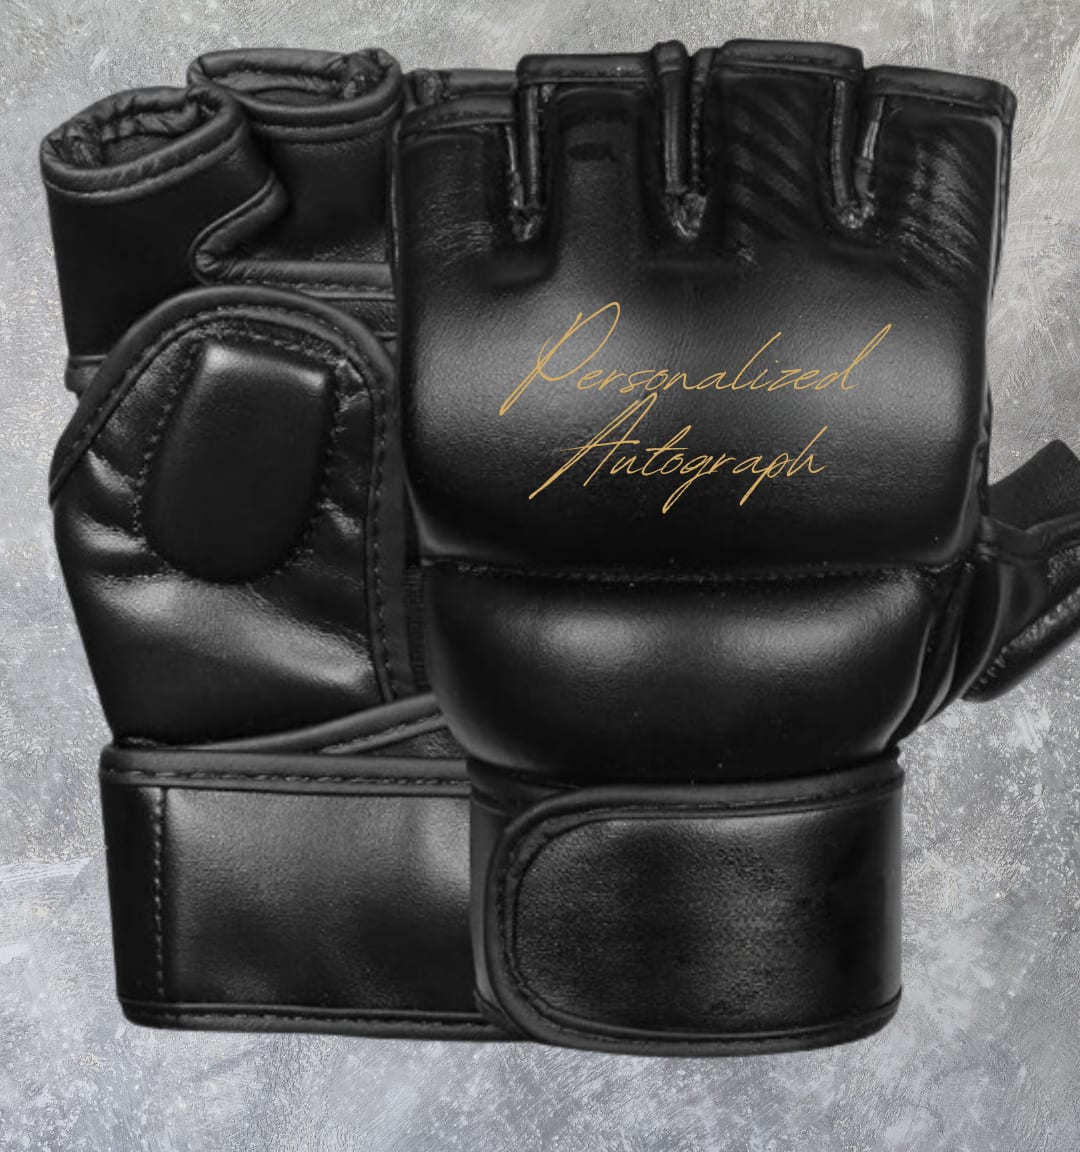 Limited Edition Sabah Homasi Autographed MMA Gloves